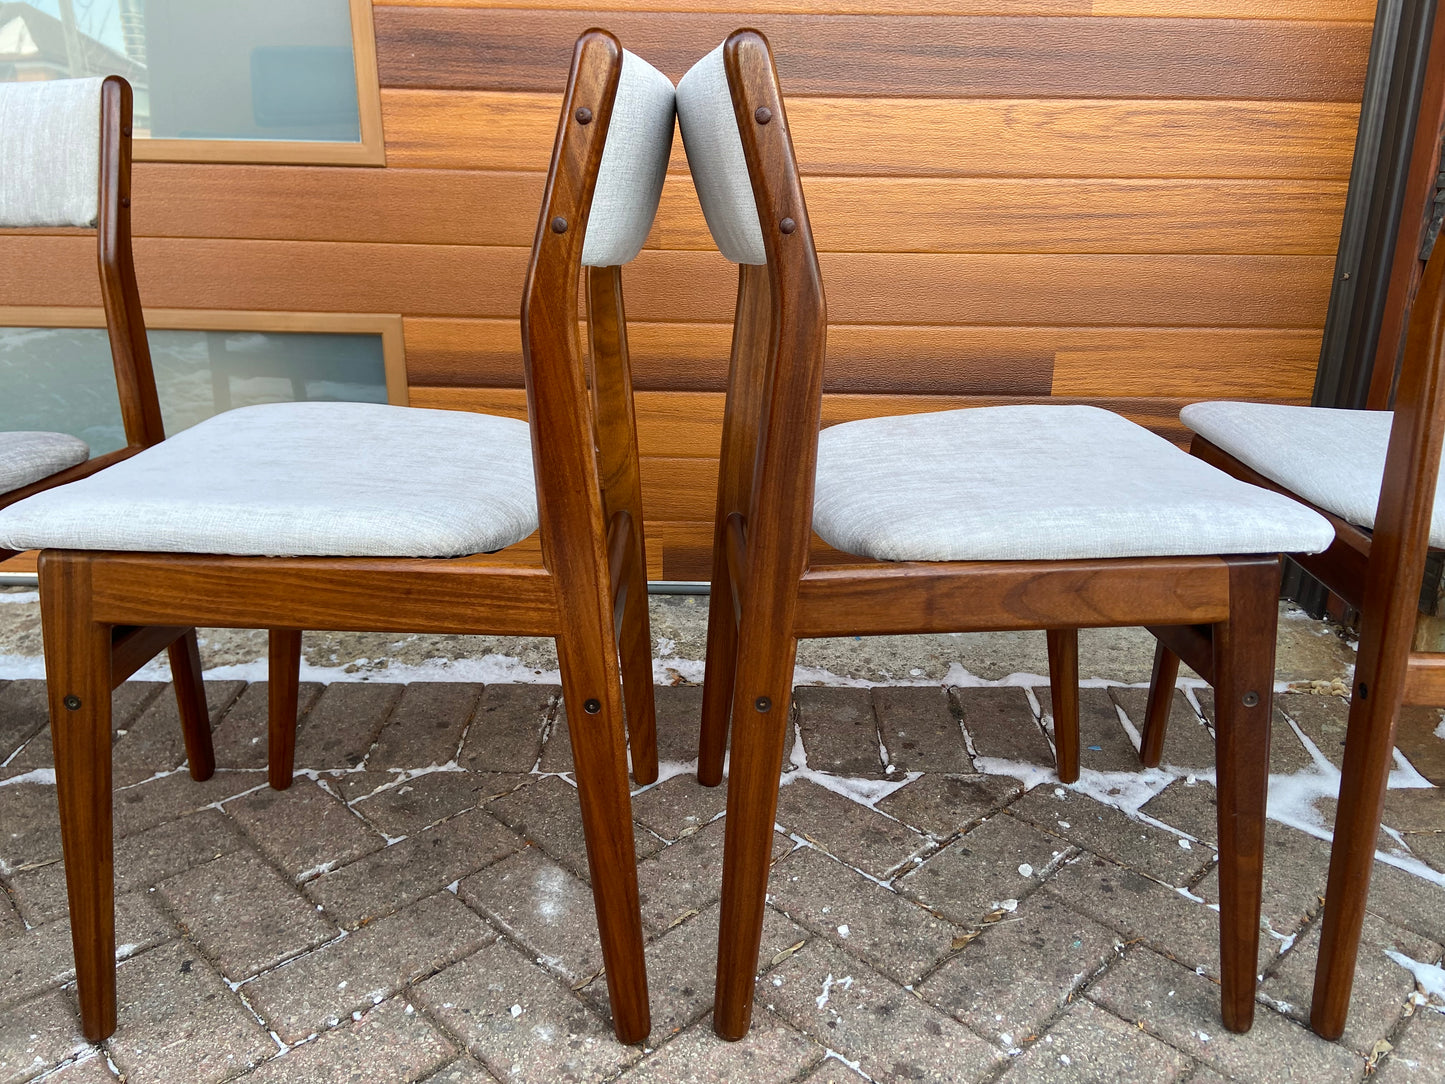 4 RESTORED REUPHOLSTERED in Knoll fabric Danish Mid Century Modern Teak Chairs